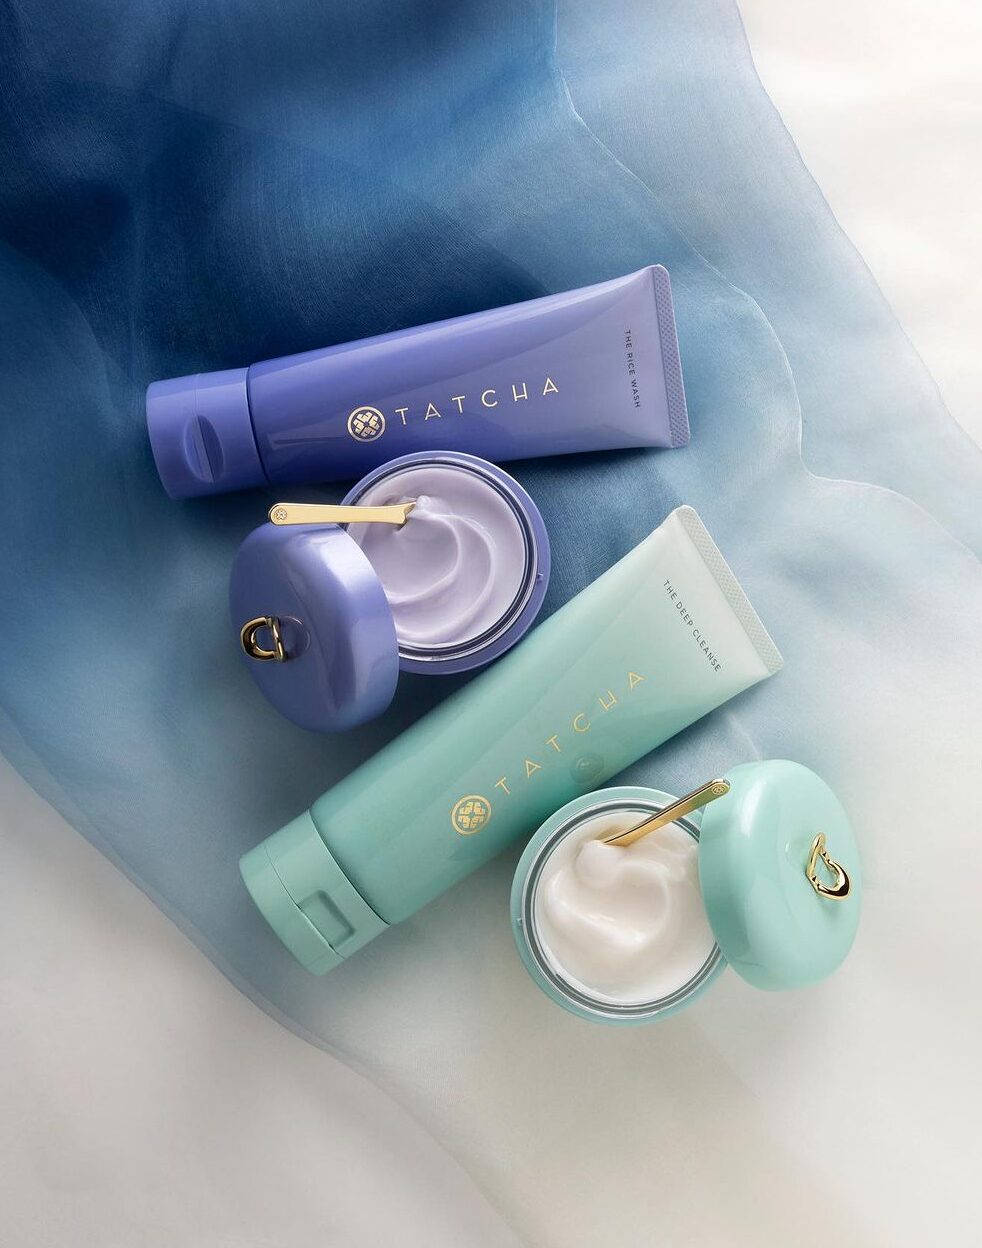 Tatcha The Rice Wash cleanser, The Deep Cleanse face wash, The Dewy Skin cream, and The Water Cream